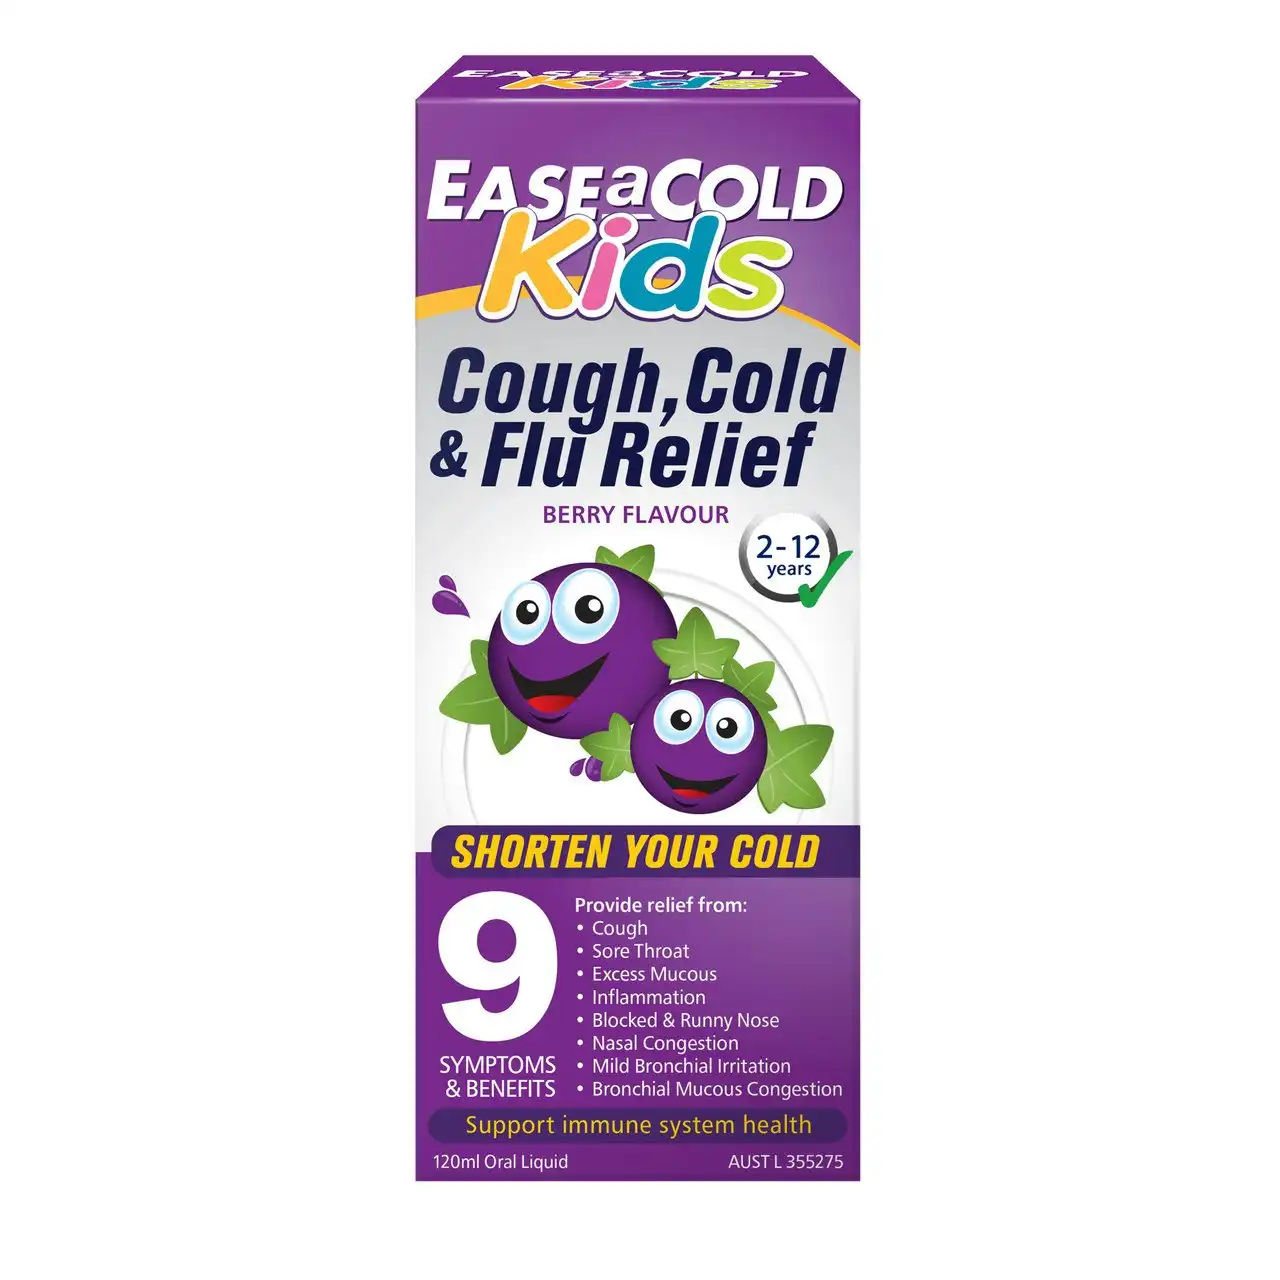 Ease-A-Cold Kids Cough, Cold & Flu Relief 120ml